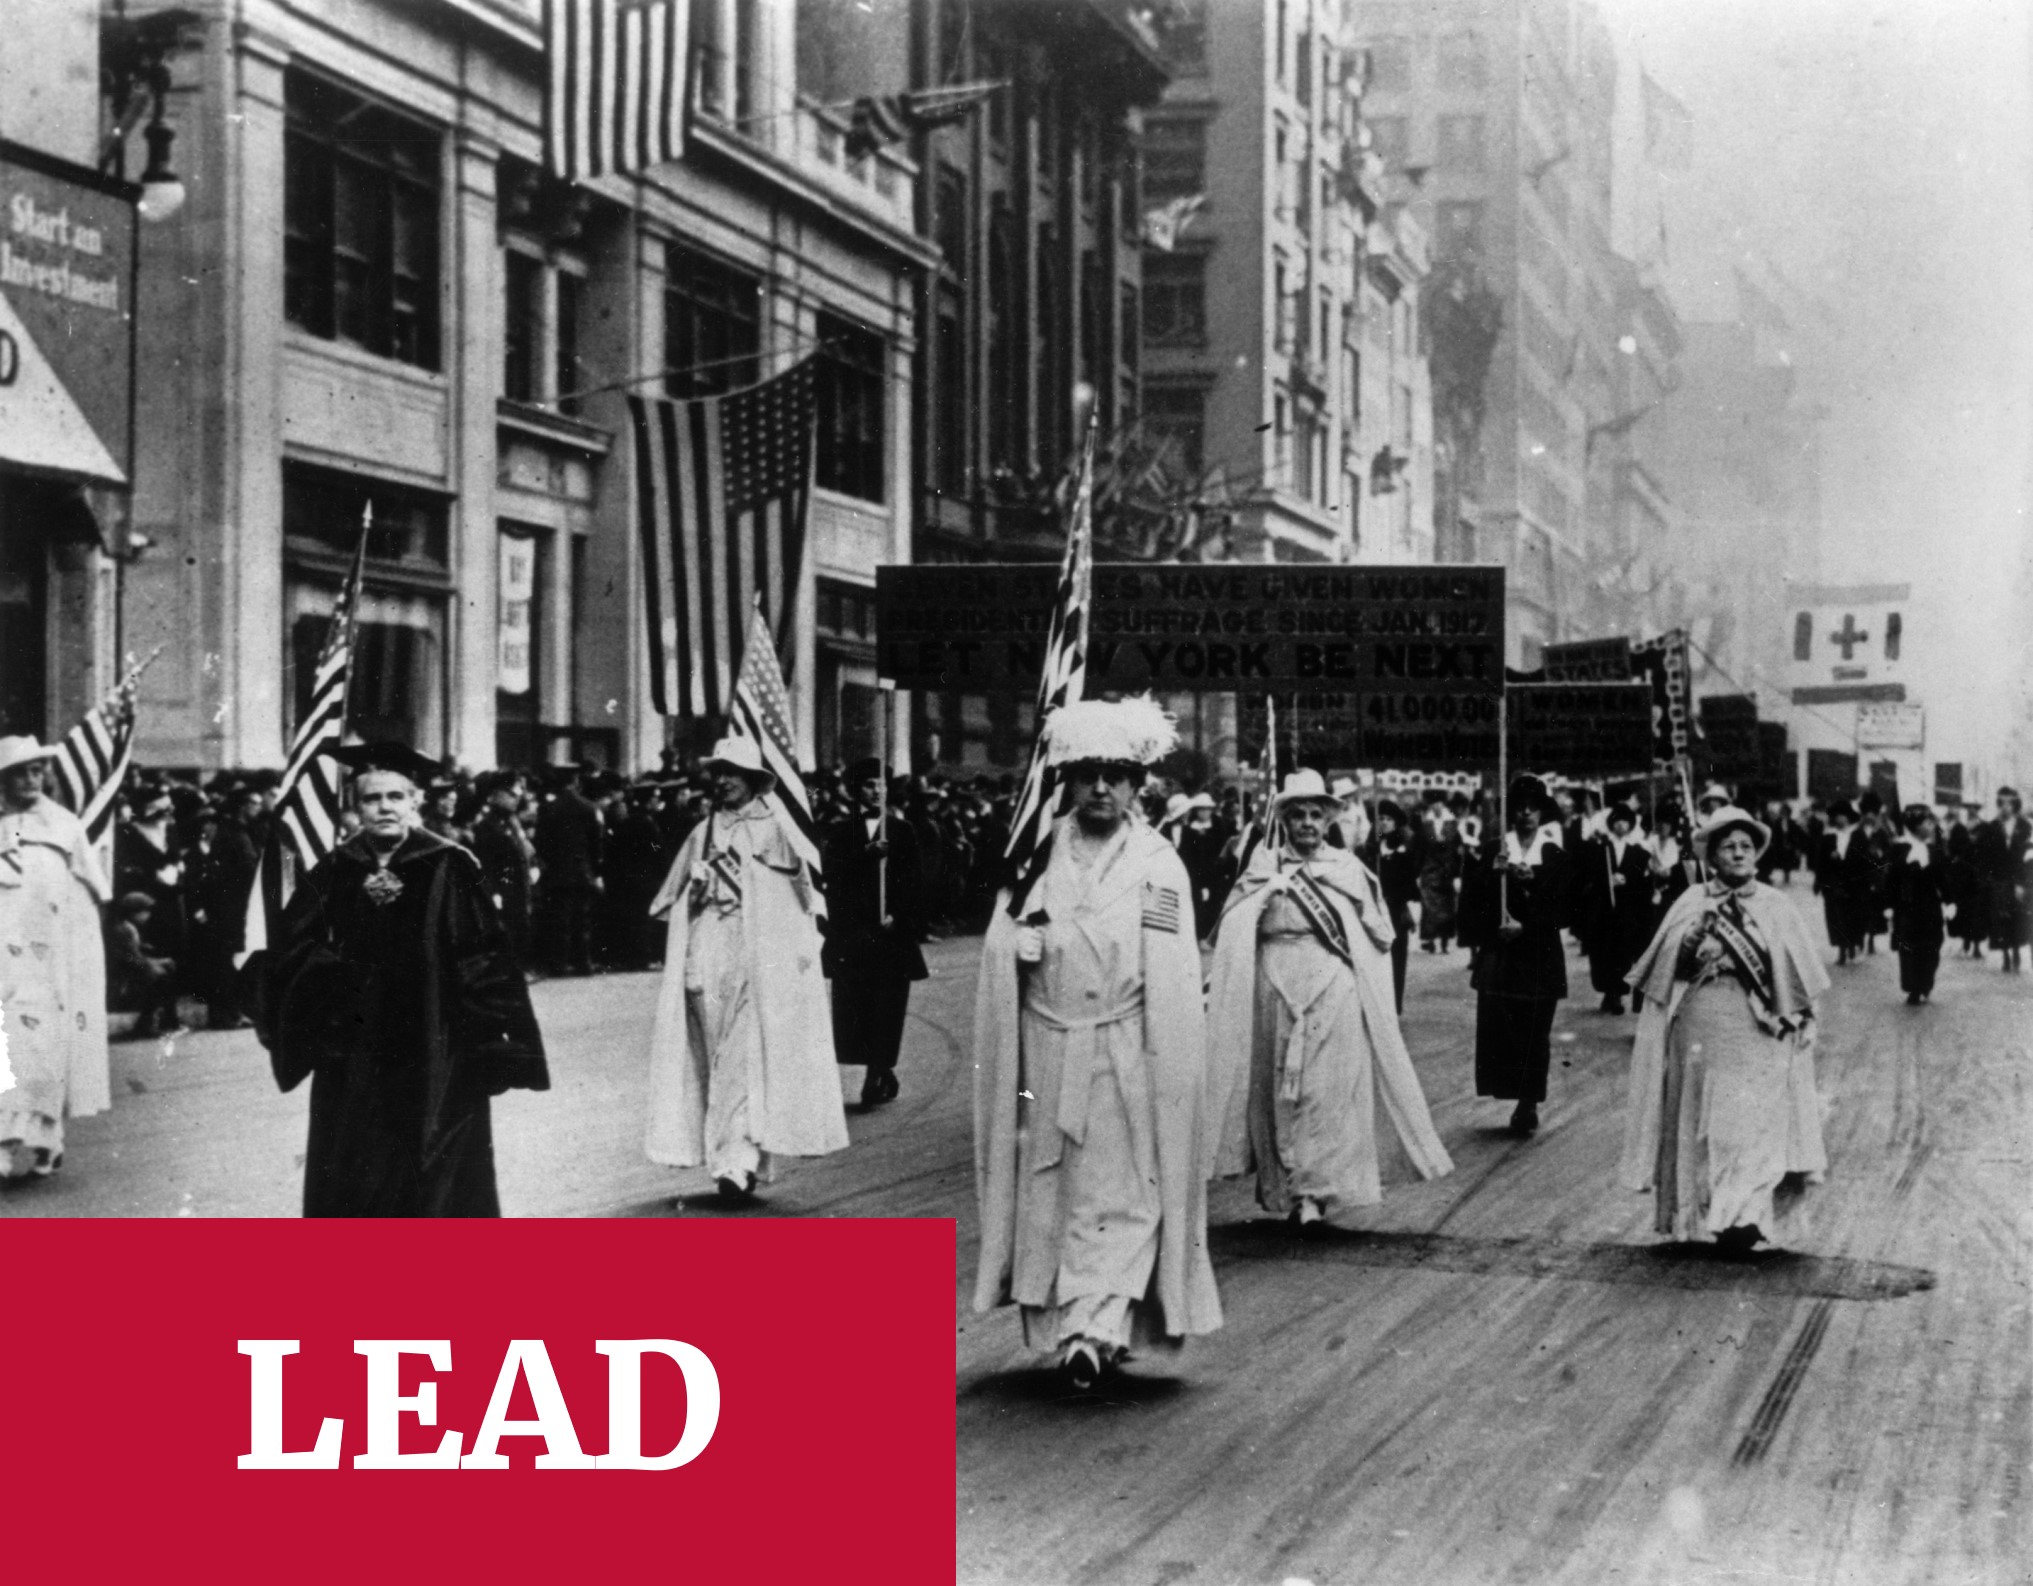 LEAD -  Historical photo of LWV marching the streets of Chicago, IL